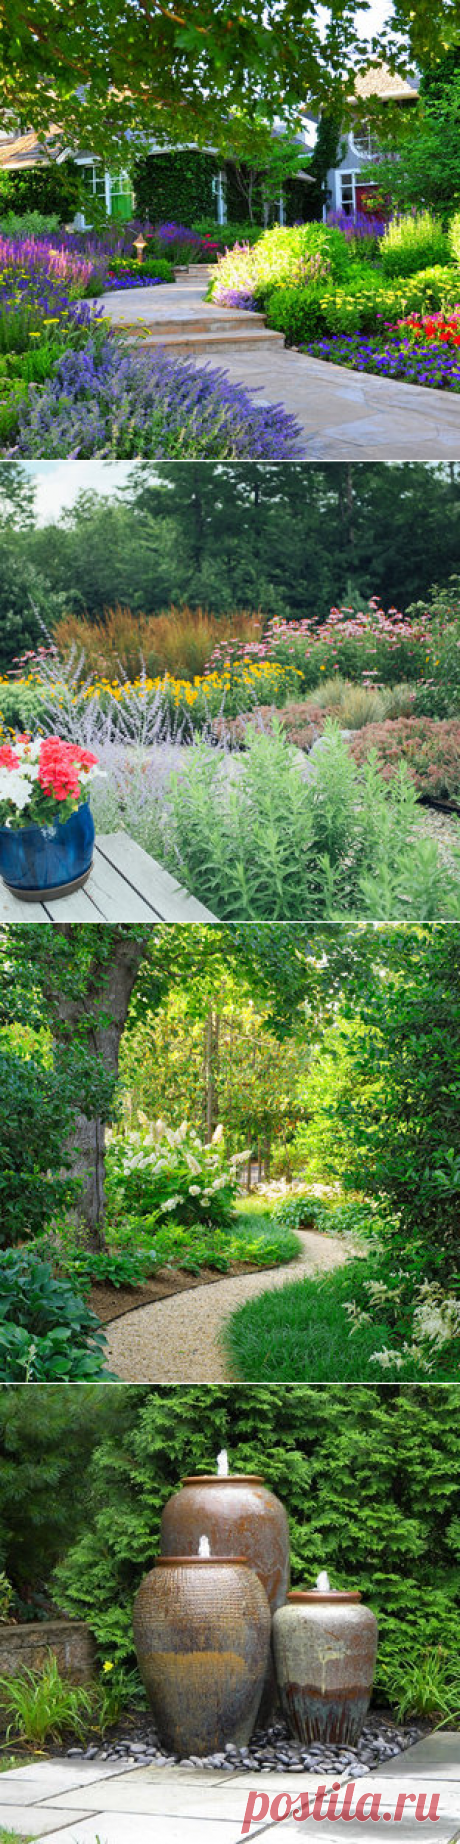 75 Beautiful Traditional Landscaping Pictures & Ideas - September, 2020 | Houzz